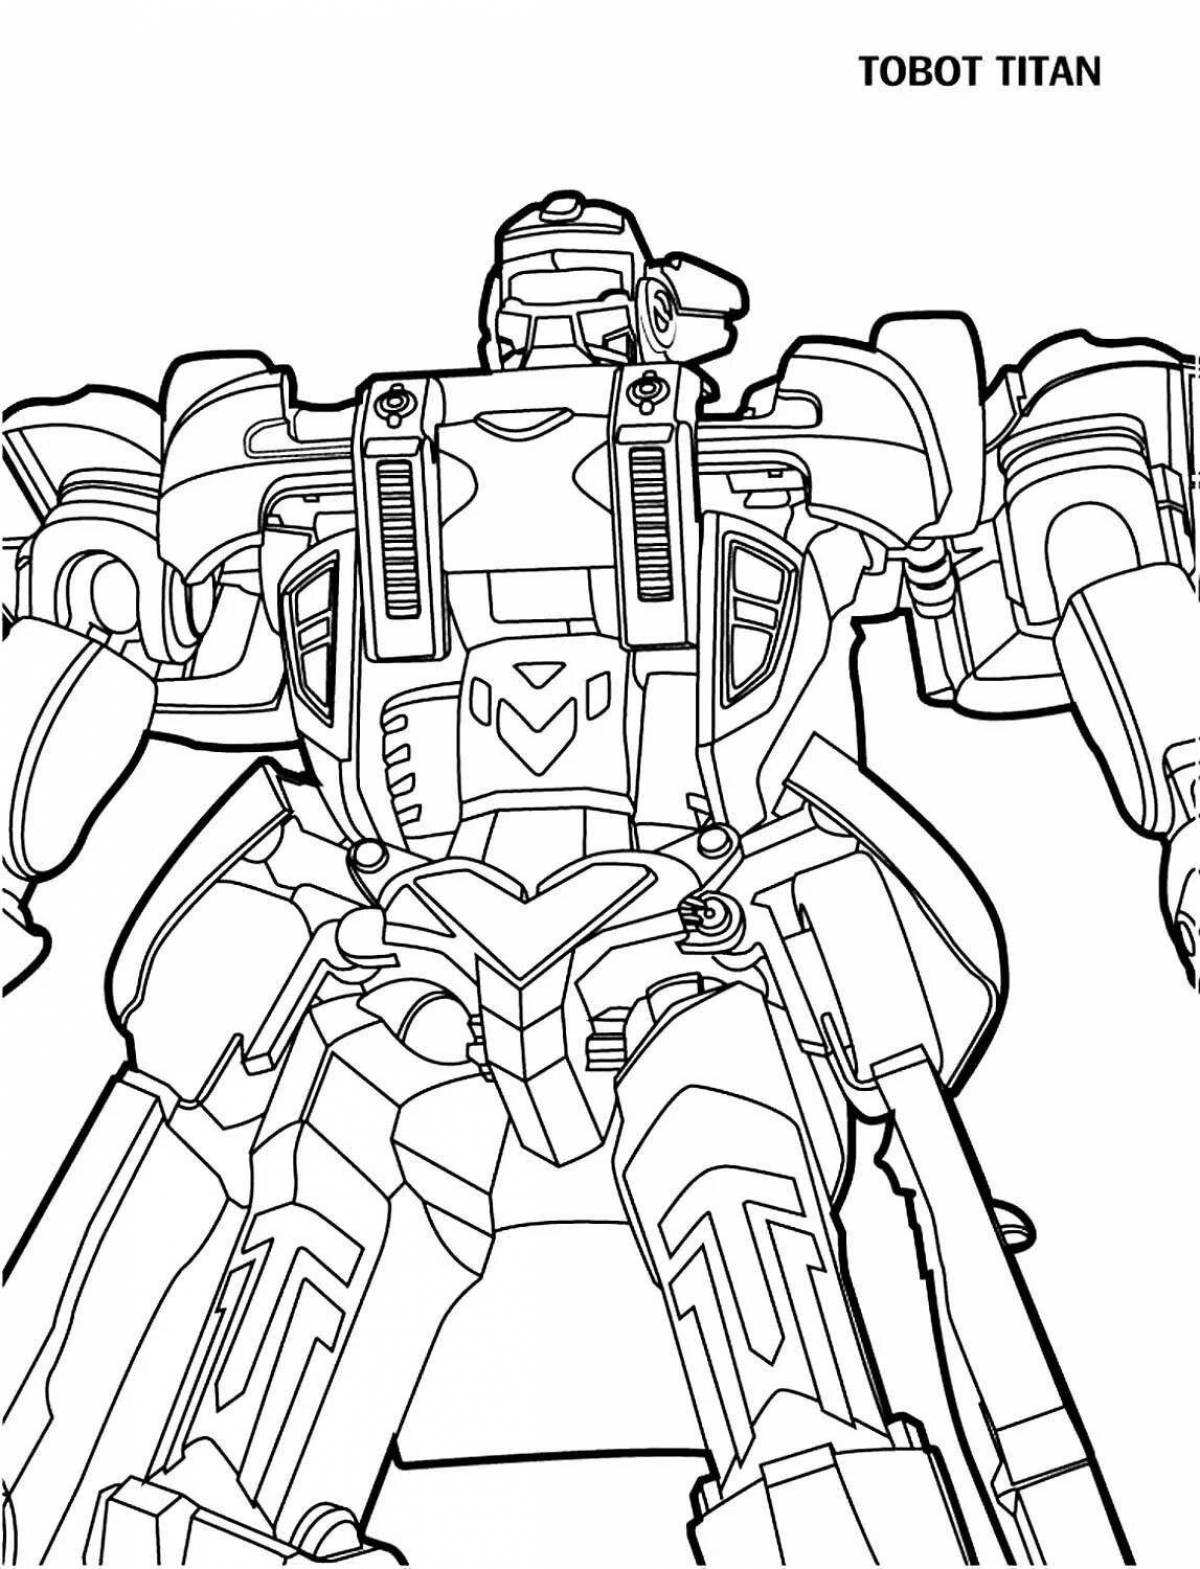 Attractive tobot r coloring page